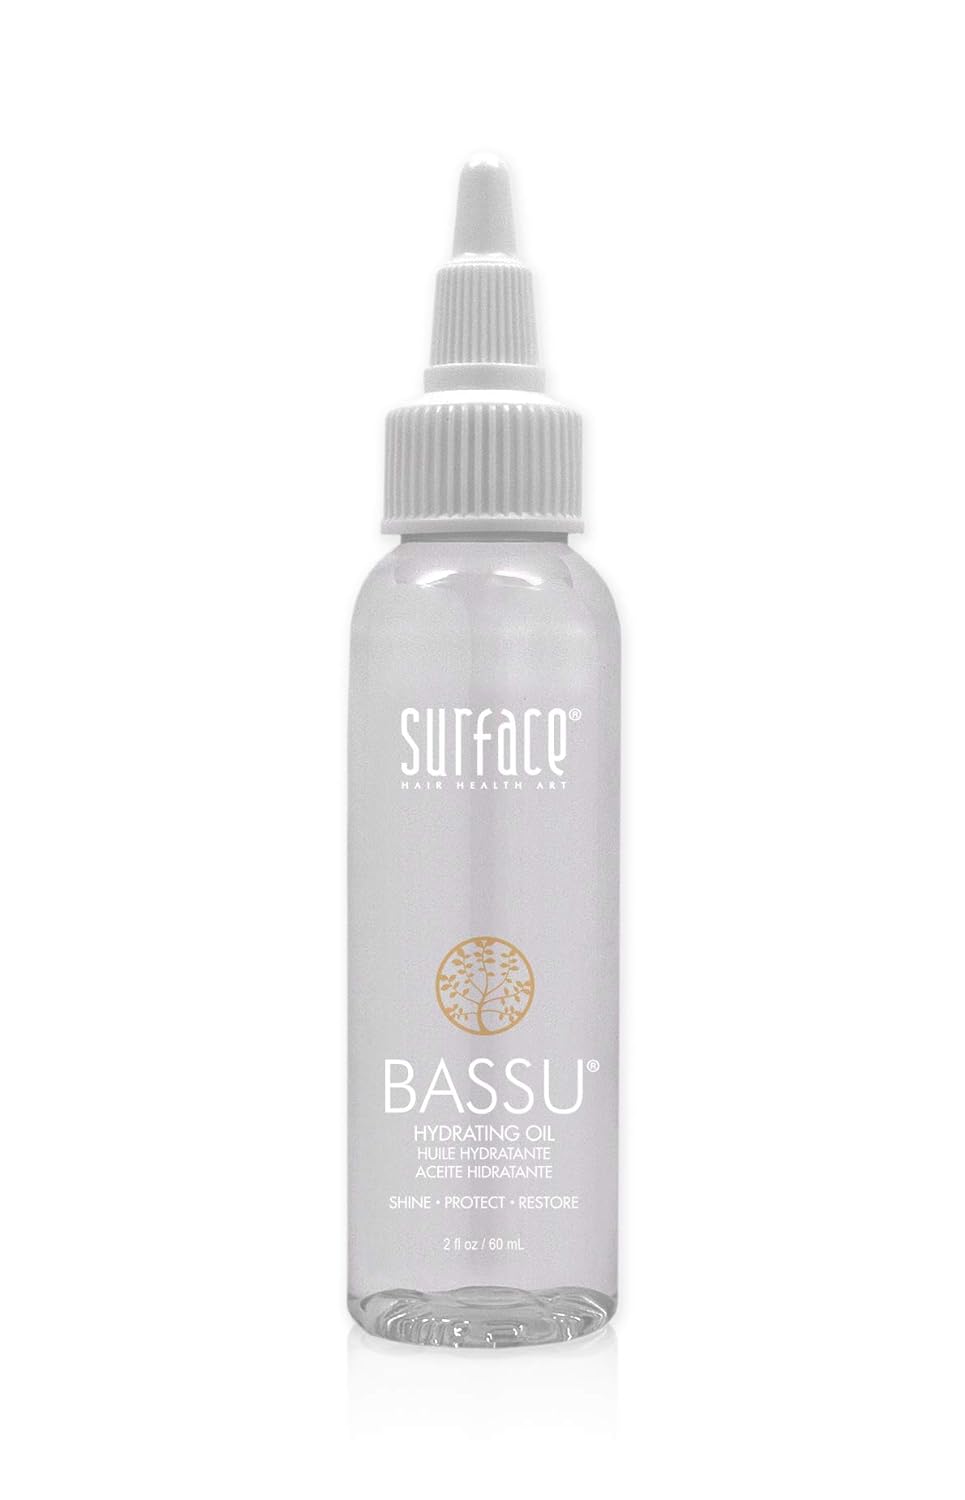 Surface Hair Bassu Hydrating Oil: Hair Oil with Flax Seed, and Aloe Vera, Moisturize and Hydrate Repair Damaged Hair, Color Safe, 2 Fl Oz